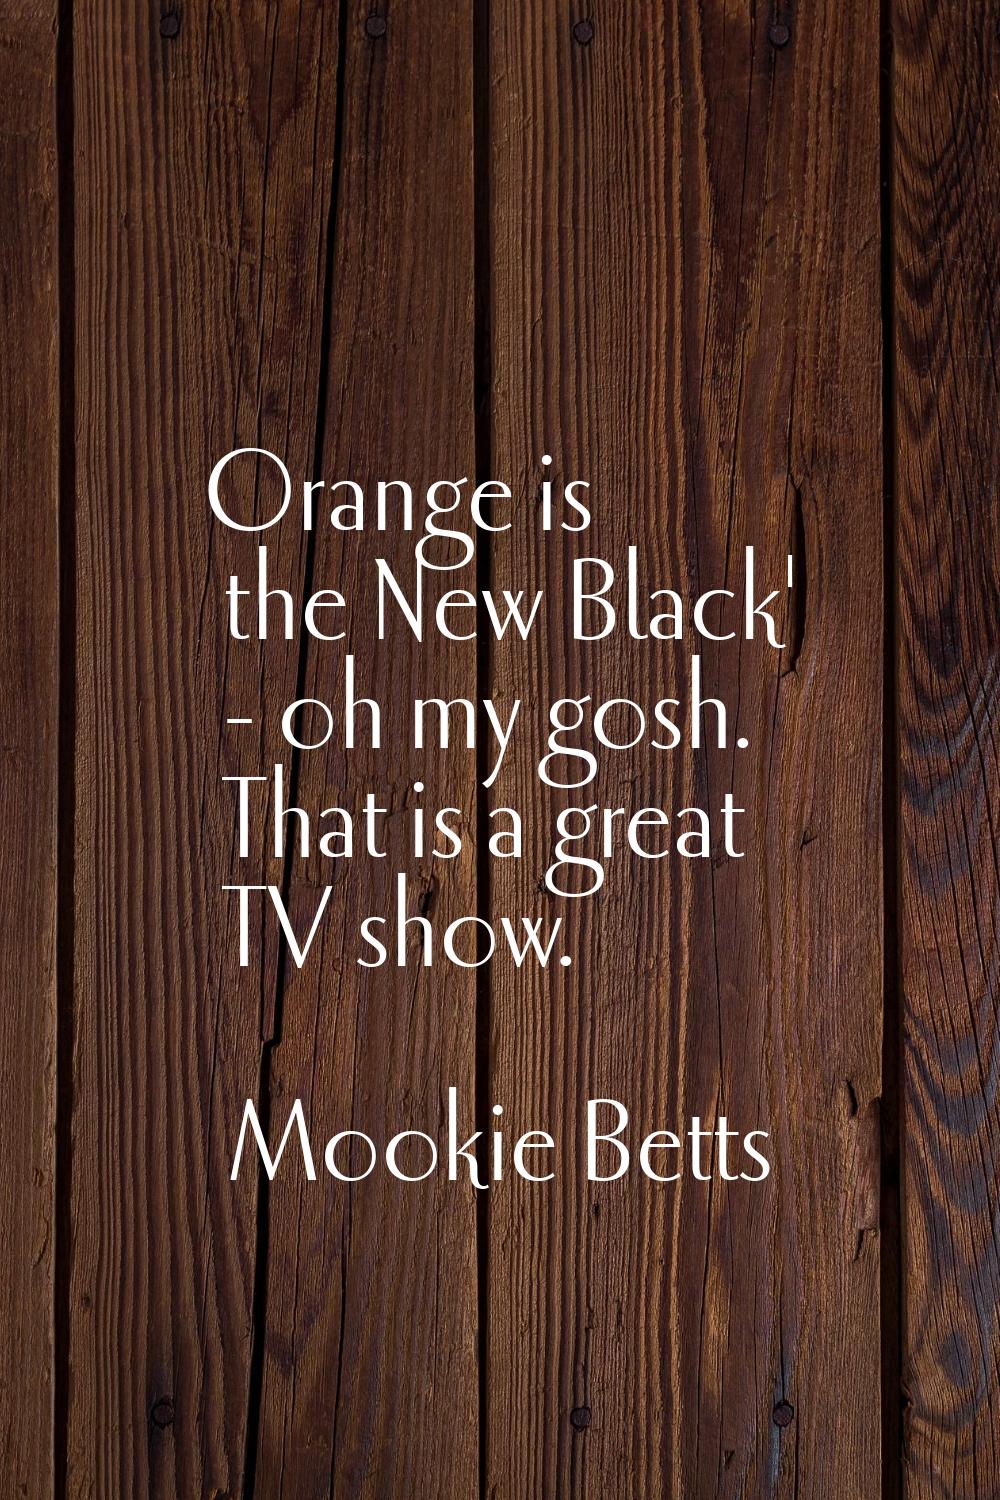 Orange is the New Black' - oh my gosh. That is a great TV show.